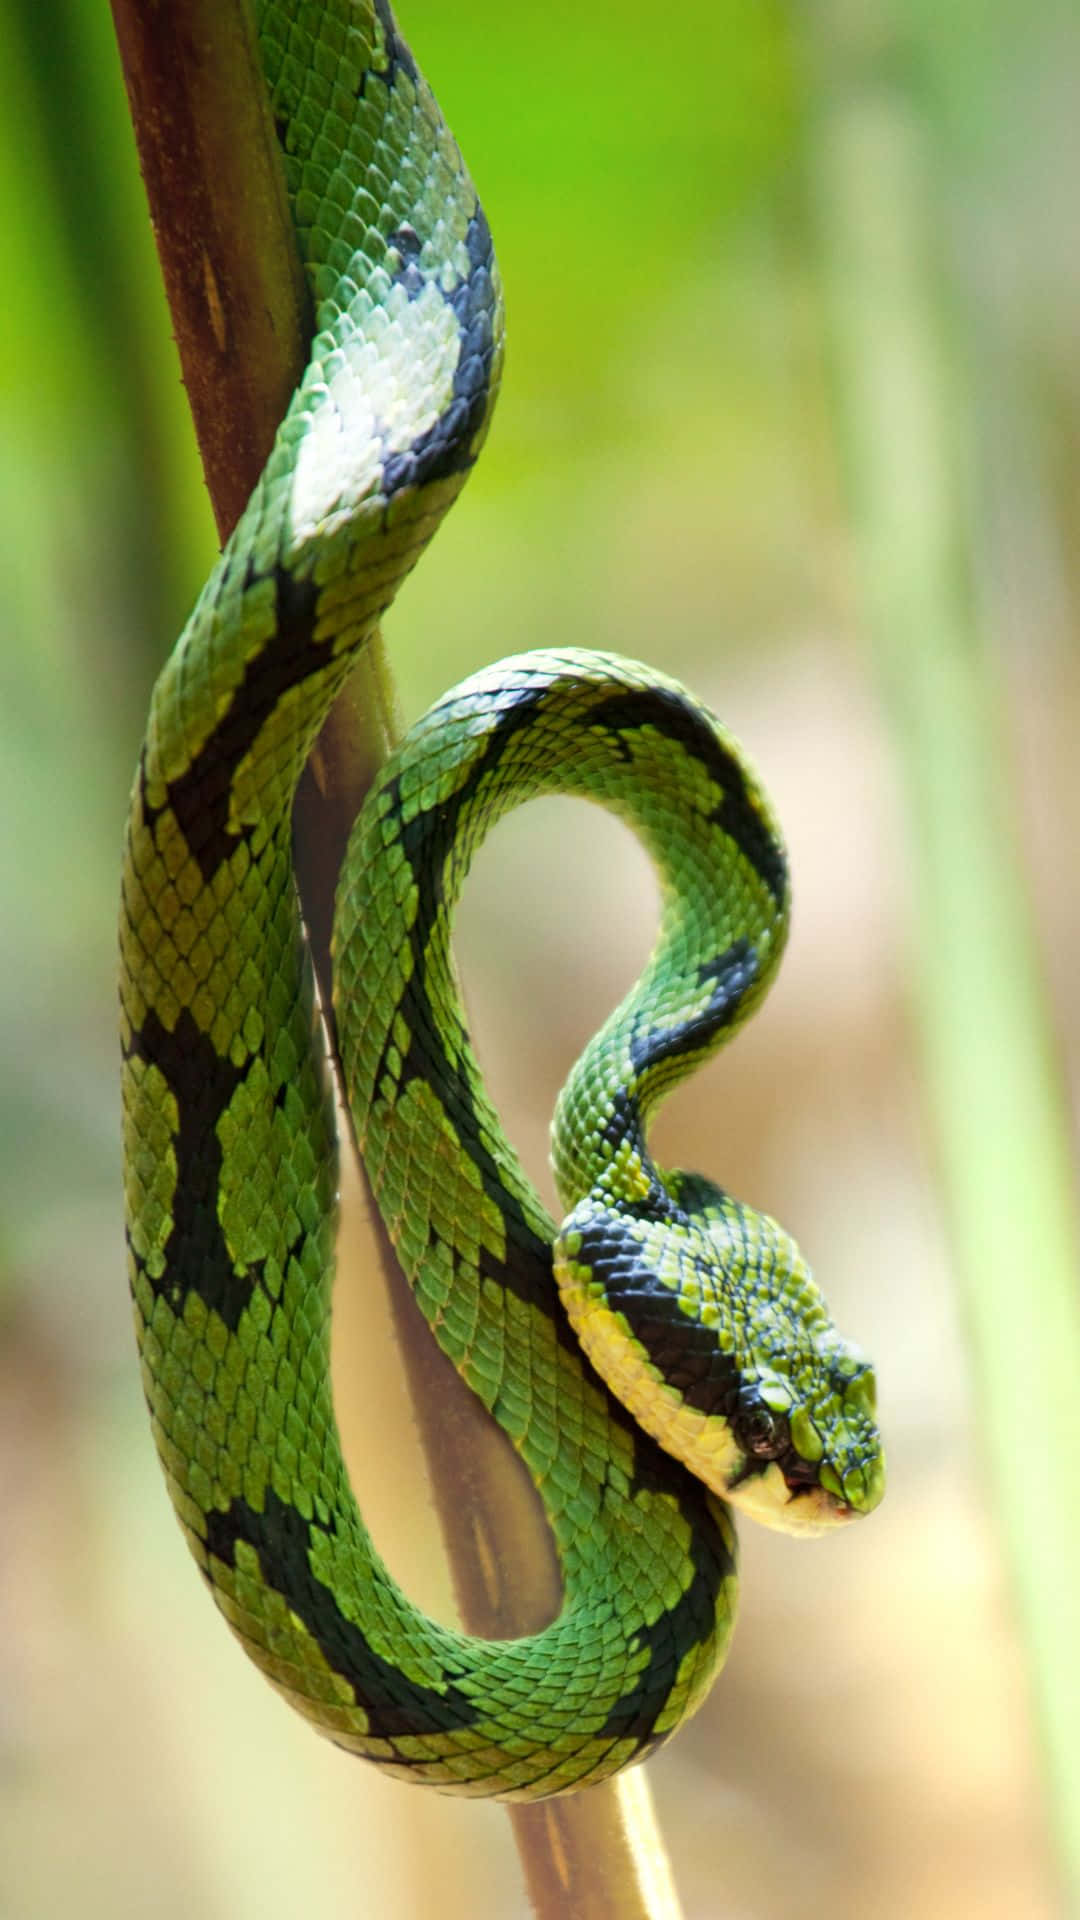 Lurking Beneath The Surface - An Up-close Look At A Cool Snake